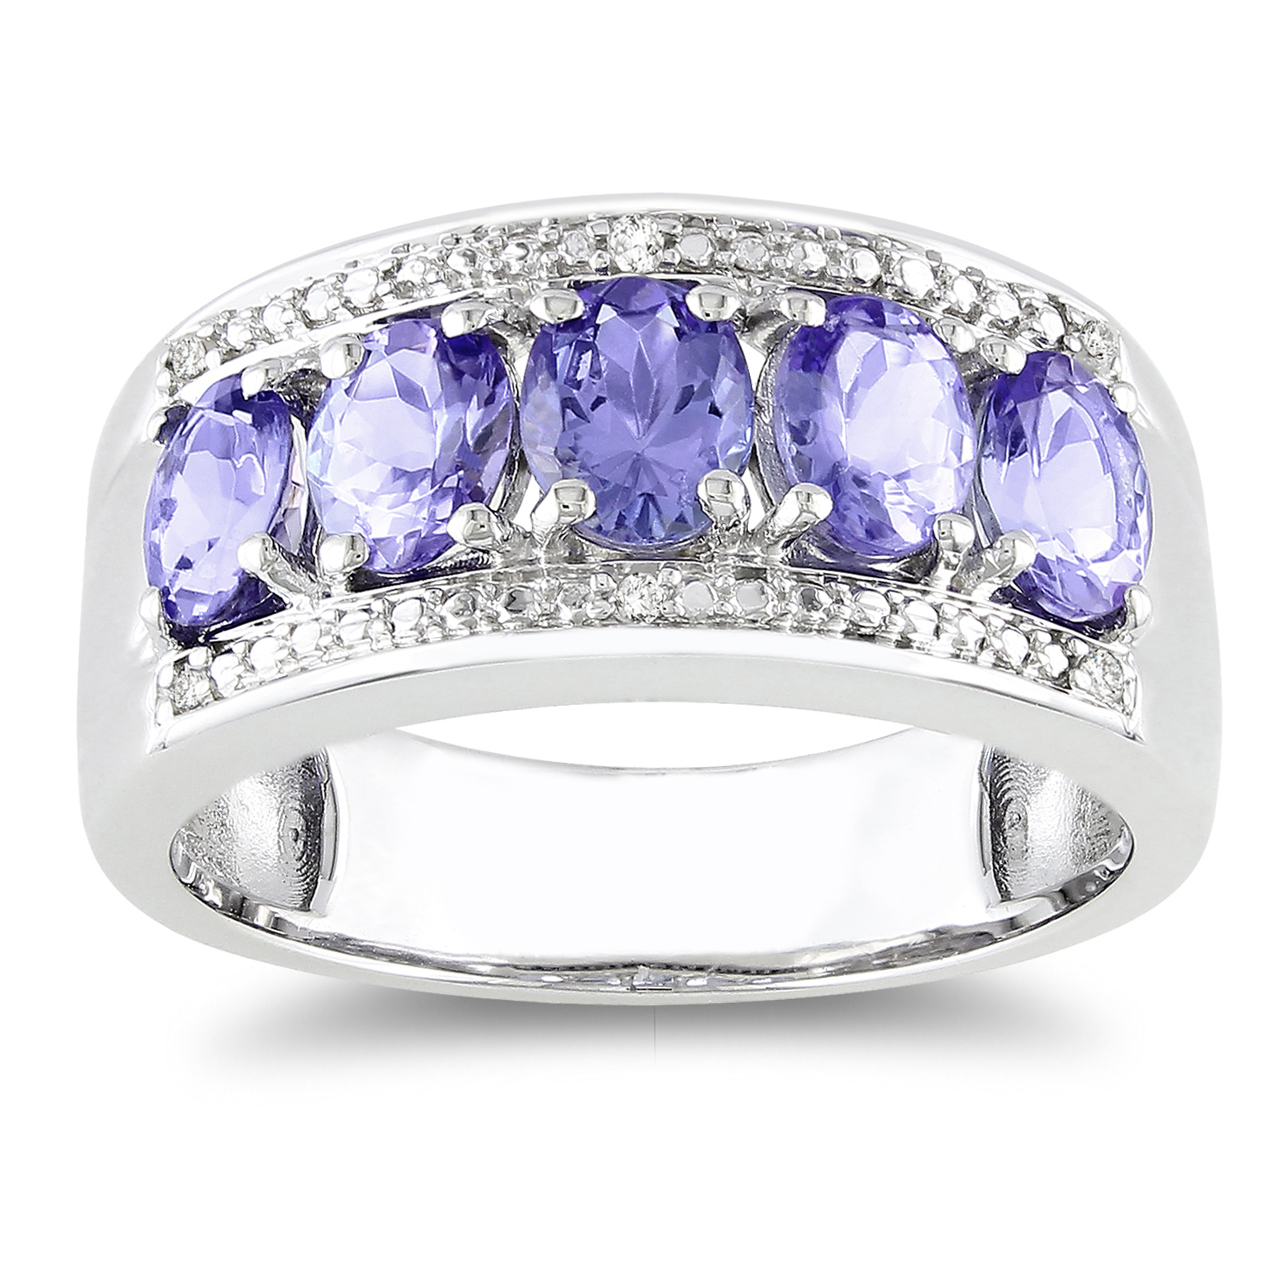 Amour 0.03 Carat T.W. Diamond and 1 1/2 Carat T.G.W. Tanzanite Fashion Ring in Sterling Silver GH I3